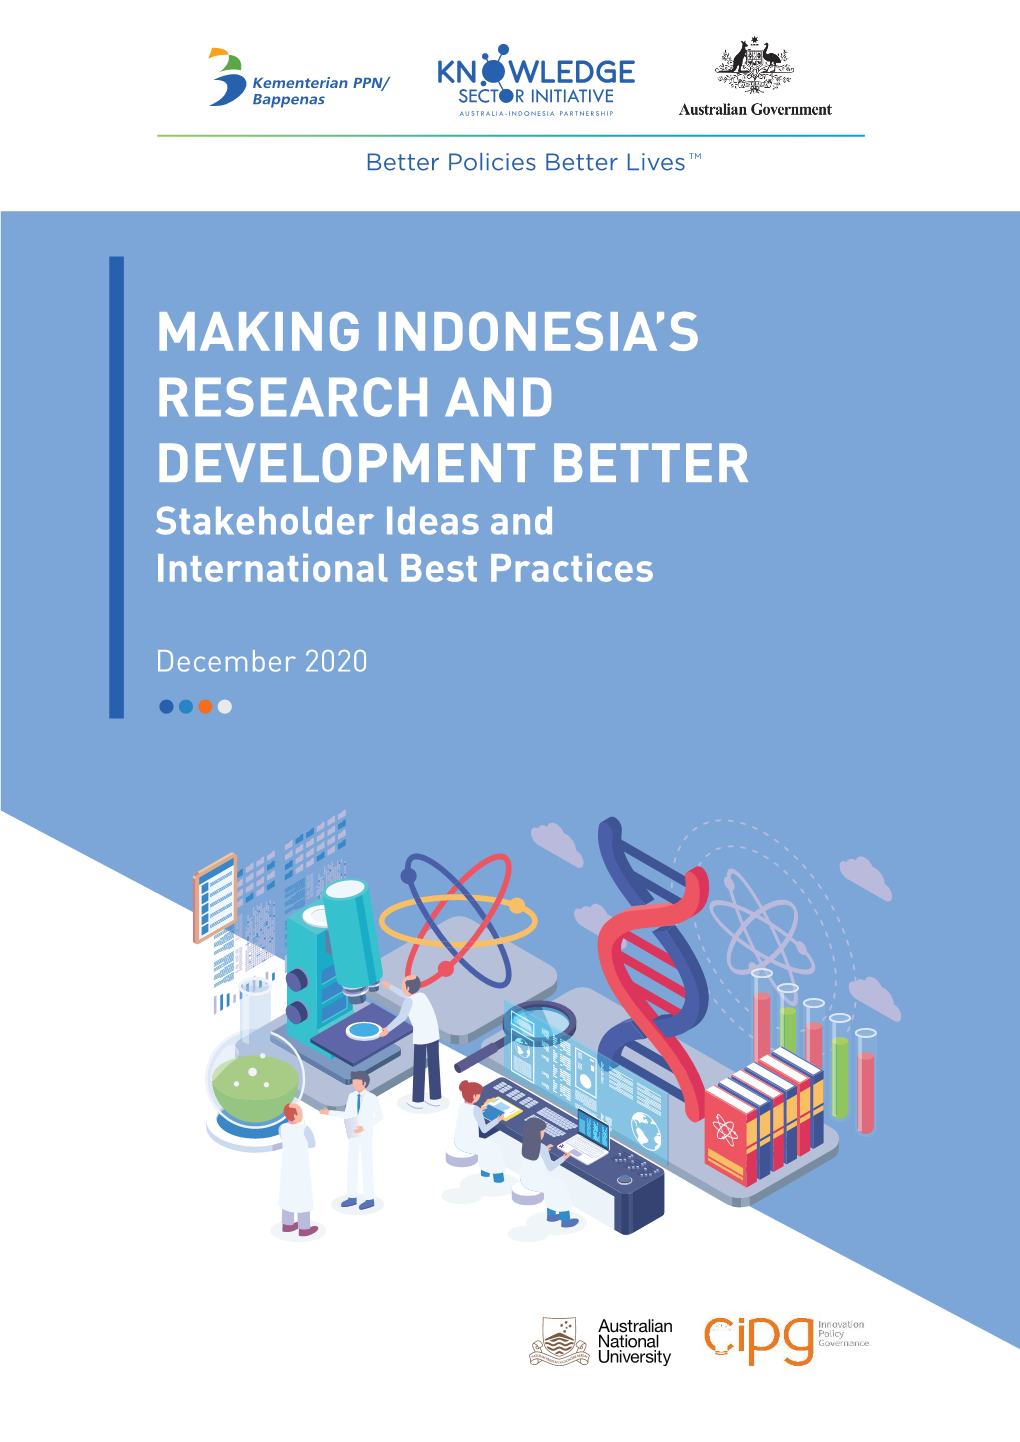 Making Indonesia's Research and Development Better